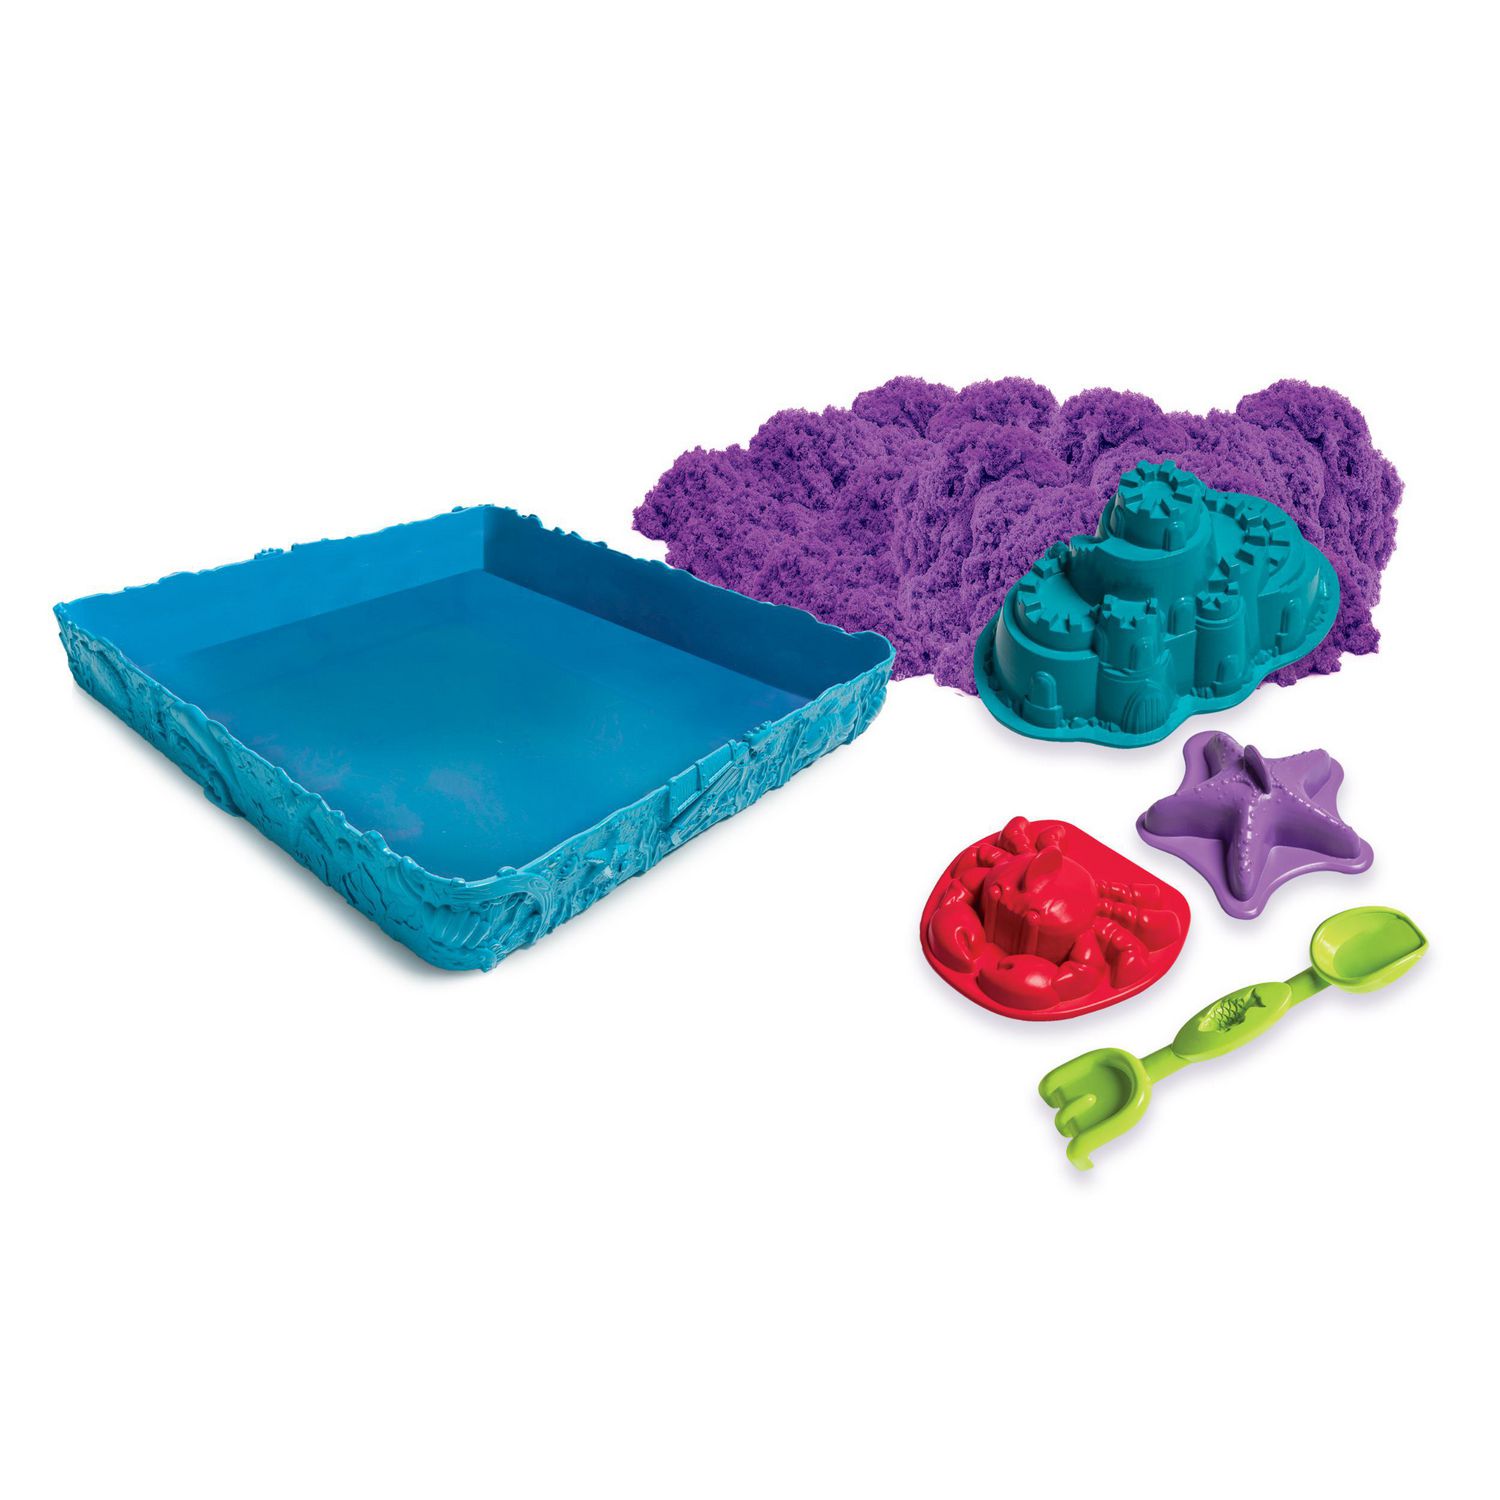 Purple Sand Molds Tools Kinetic Sand The One Only Sandcastle Set 1lb Sand 